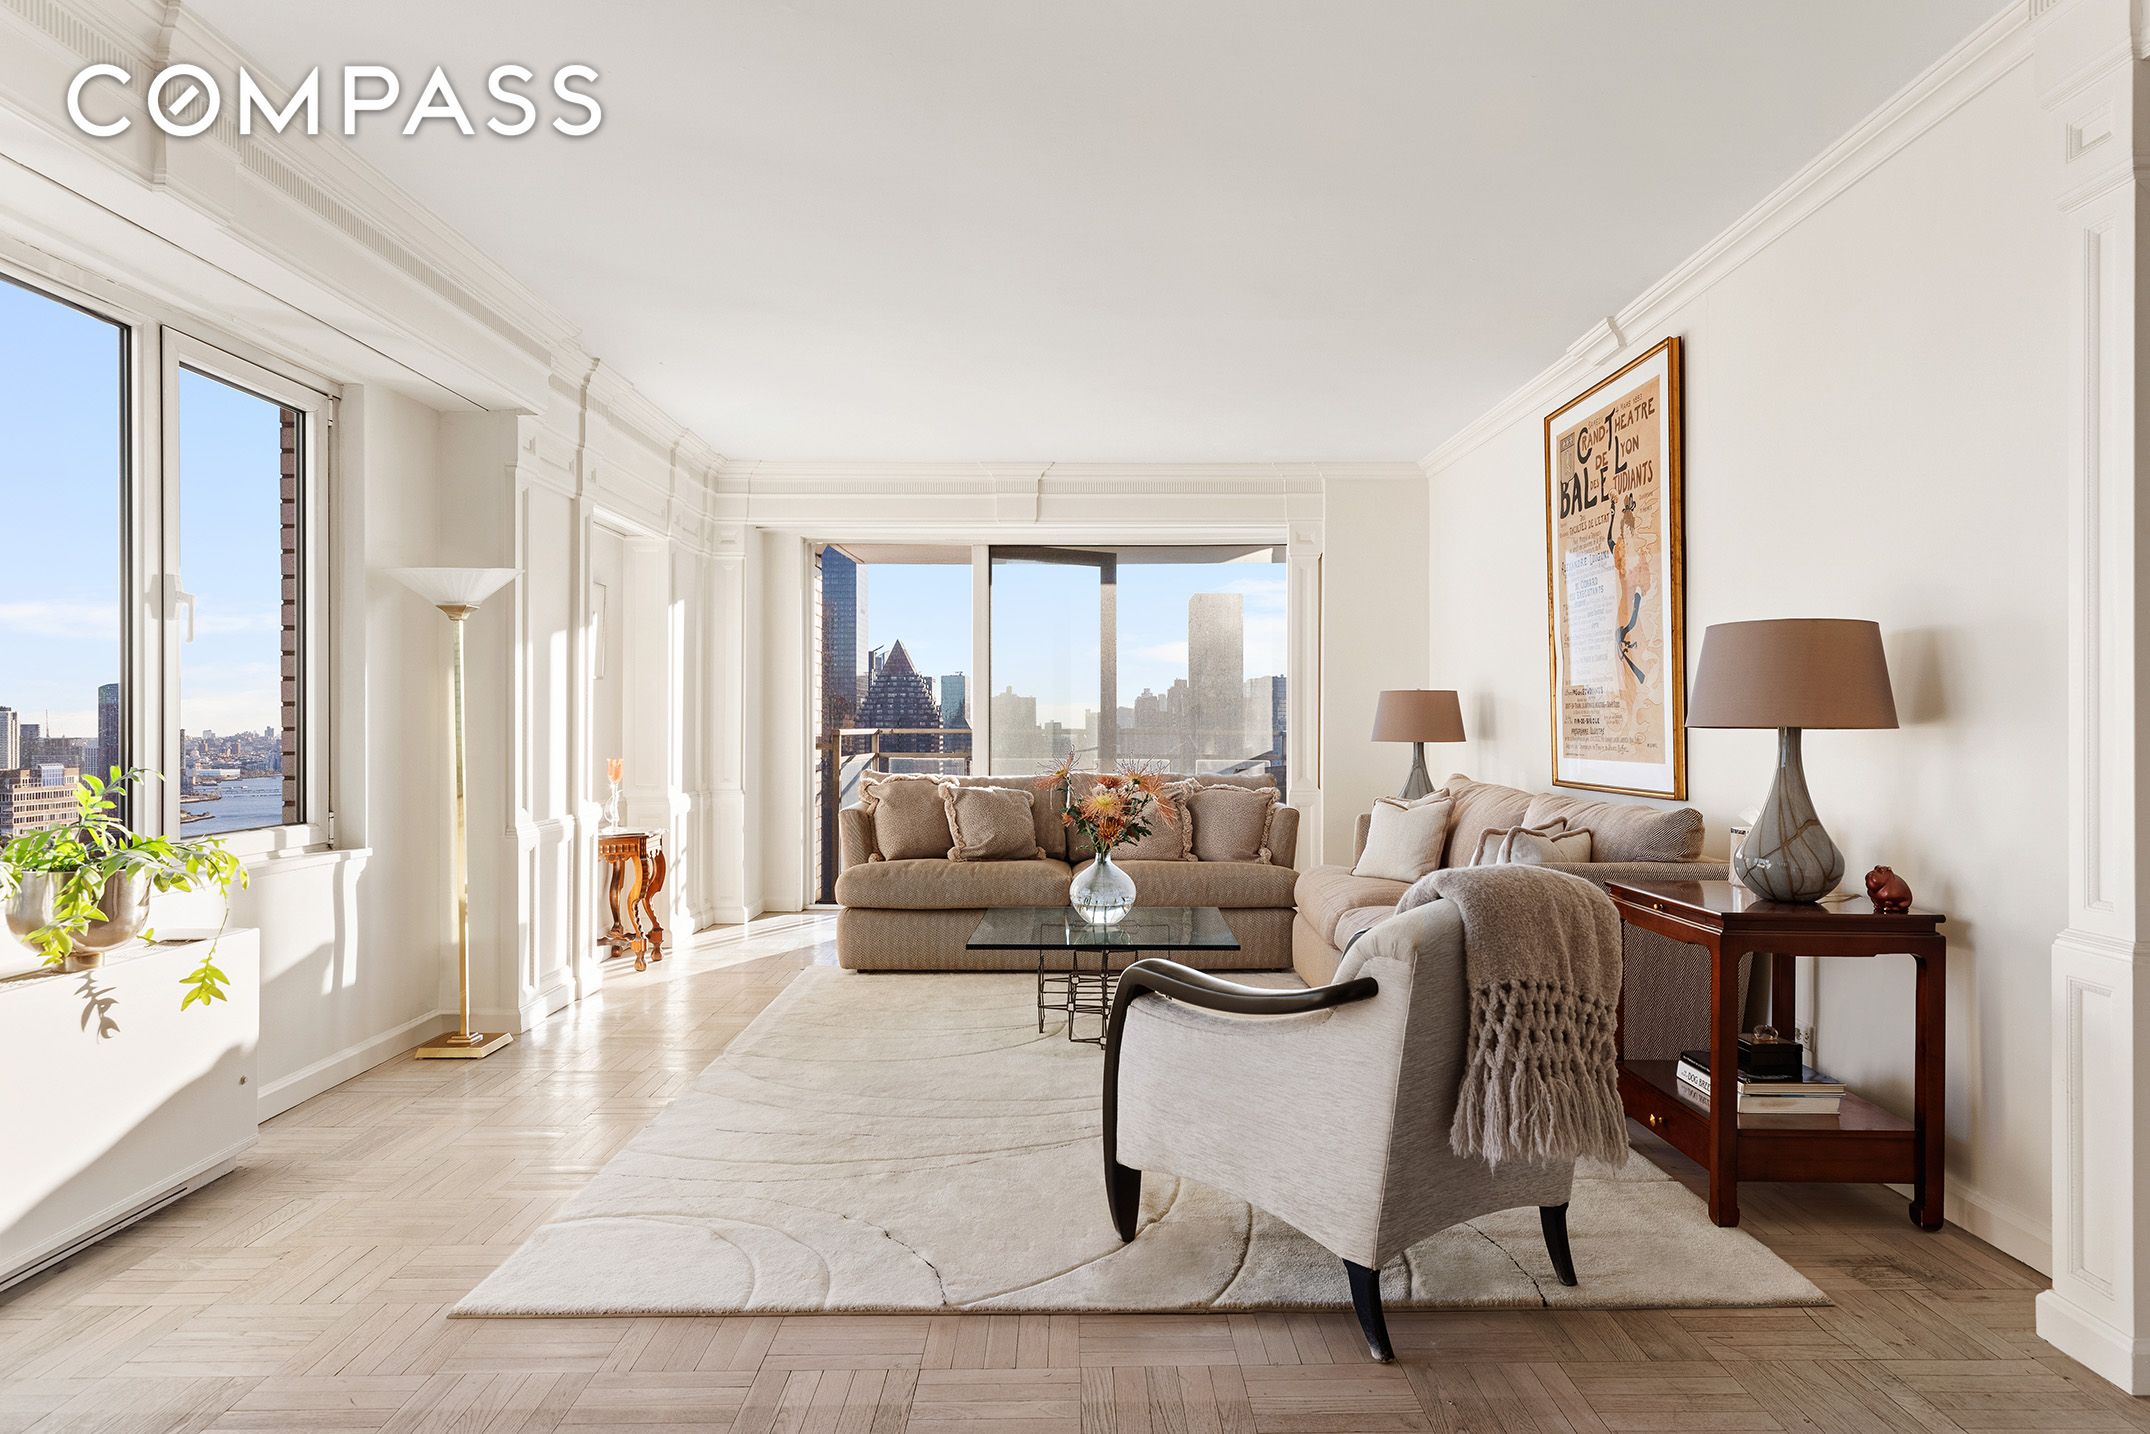 303 East 57th Street 39A, Sutton Place, Midtown East, NYC - 3 Bedrooms  
3 Bathrooms  
6 Rooms - 